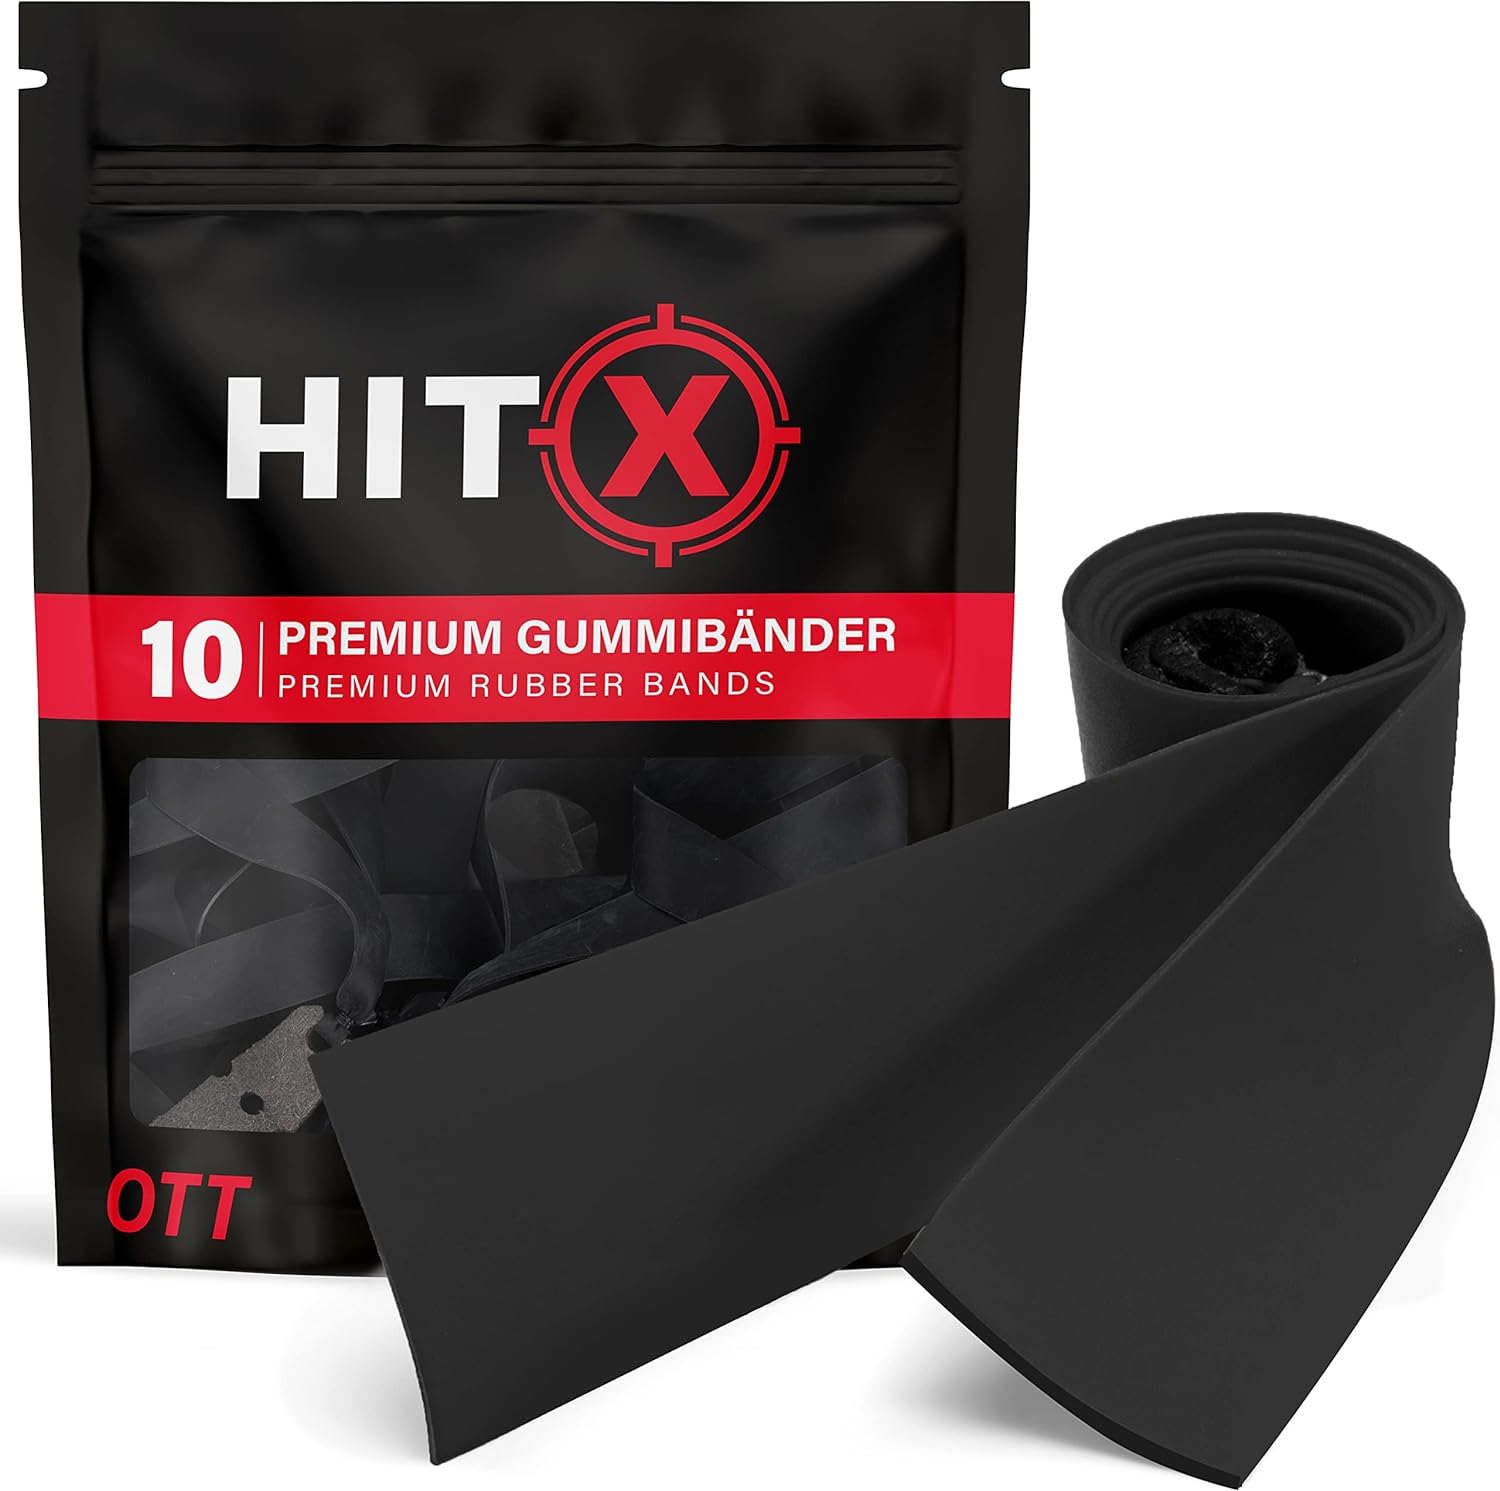 Slingshot rubber band from HITX®